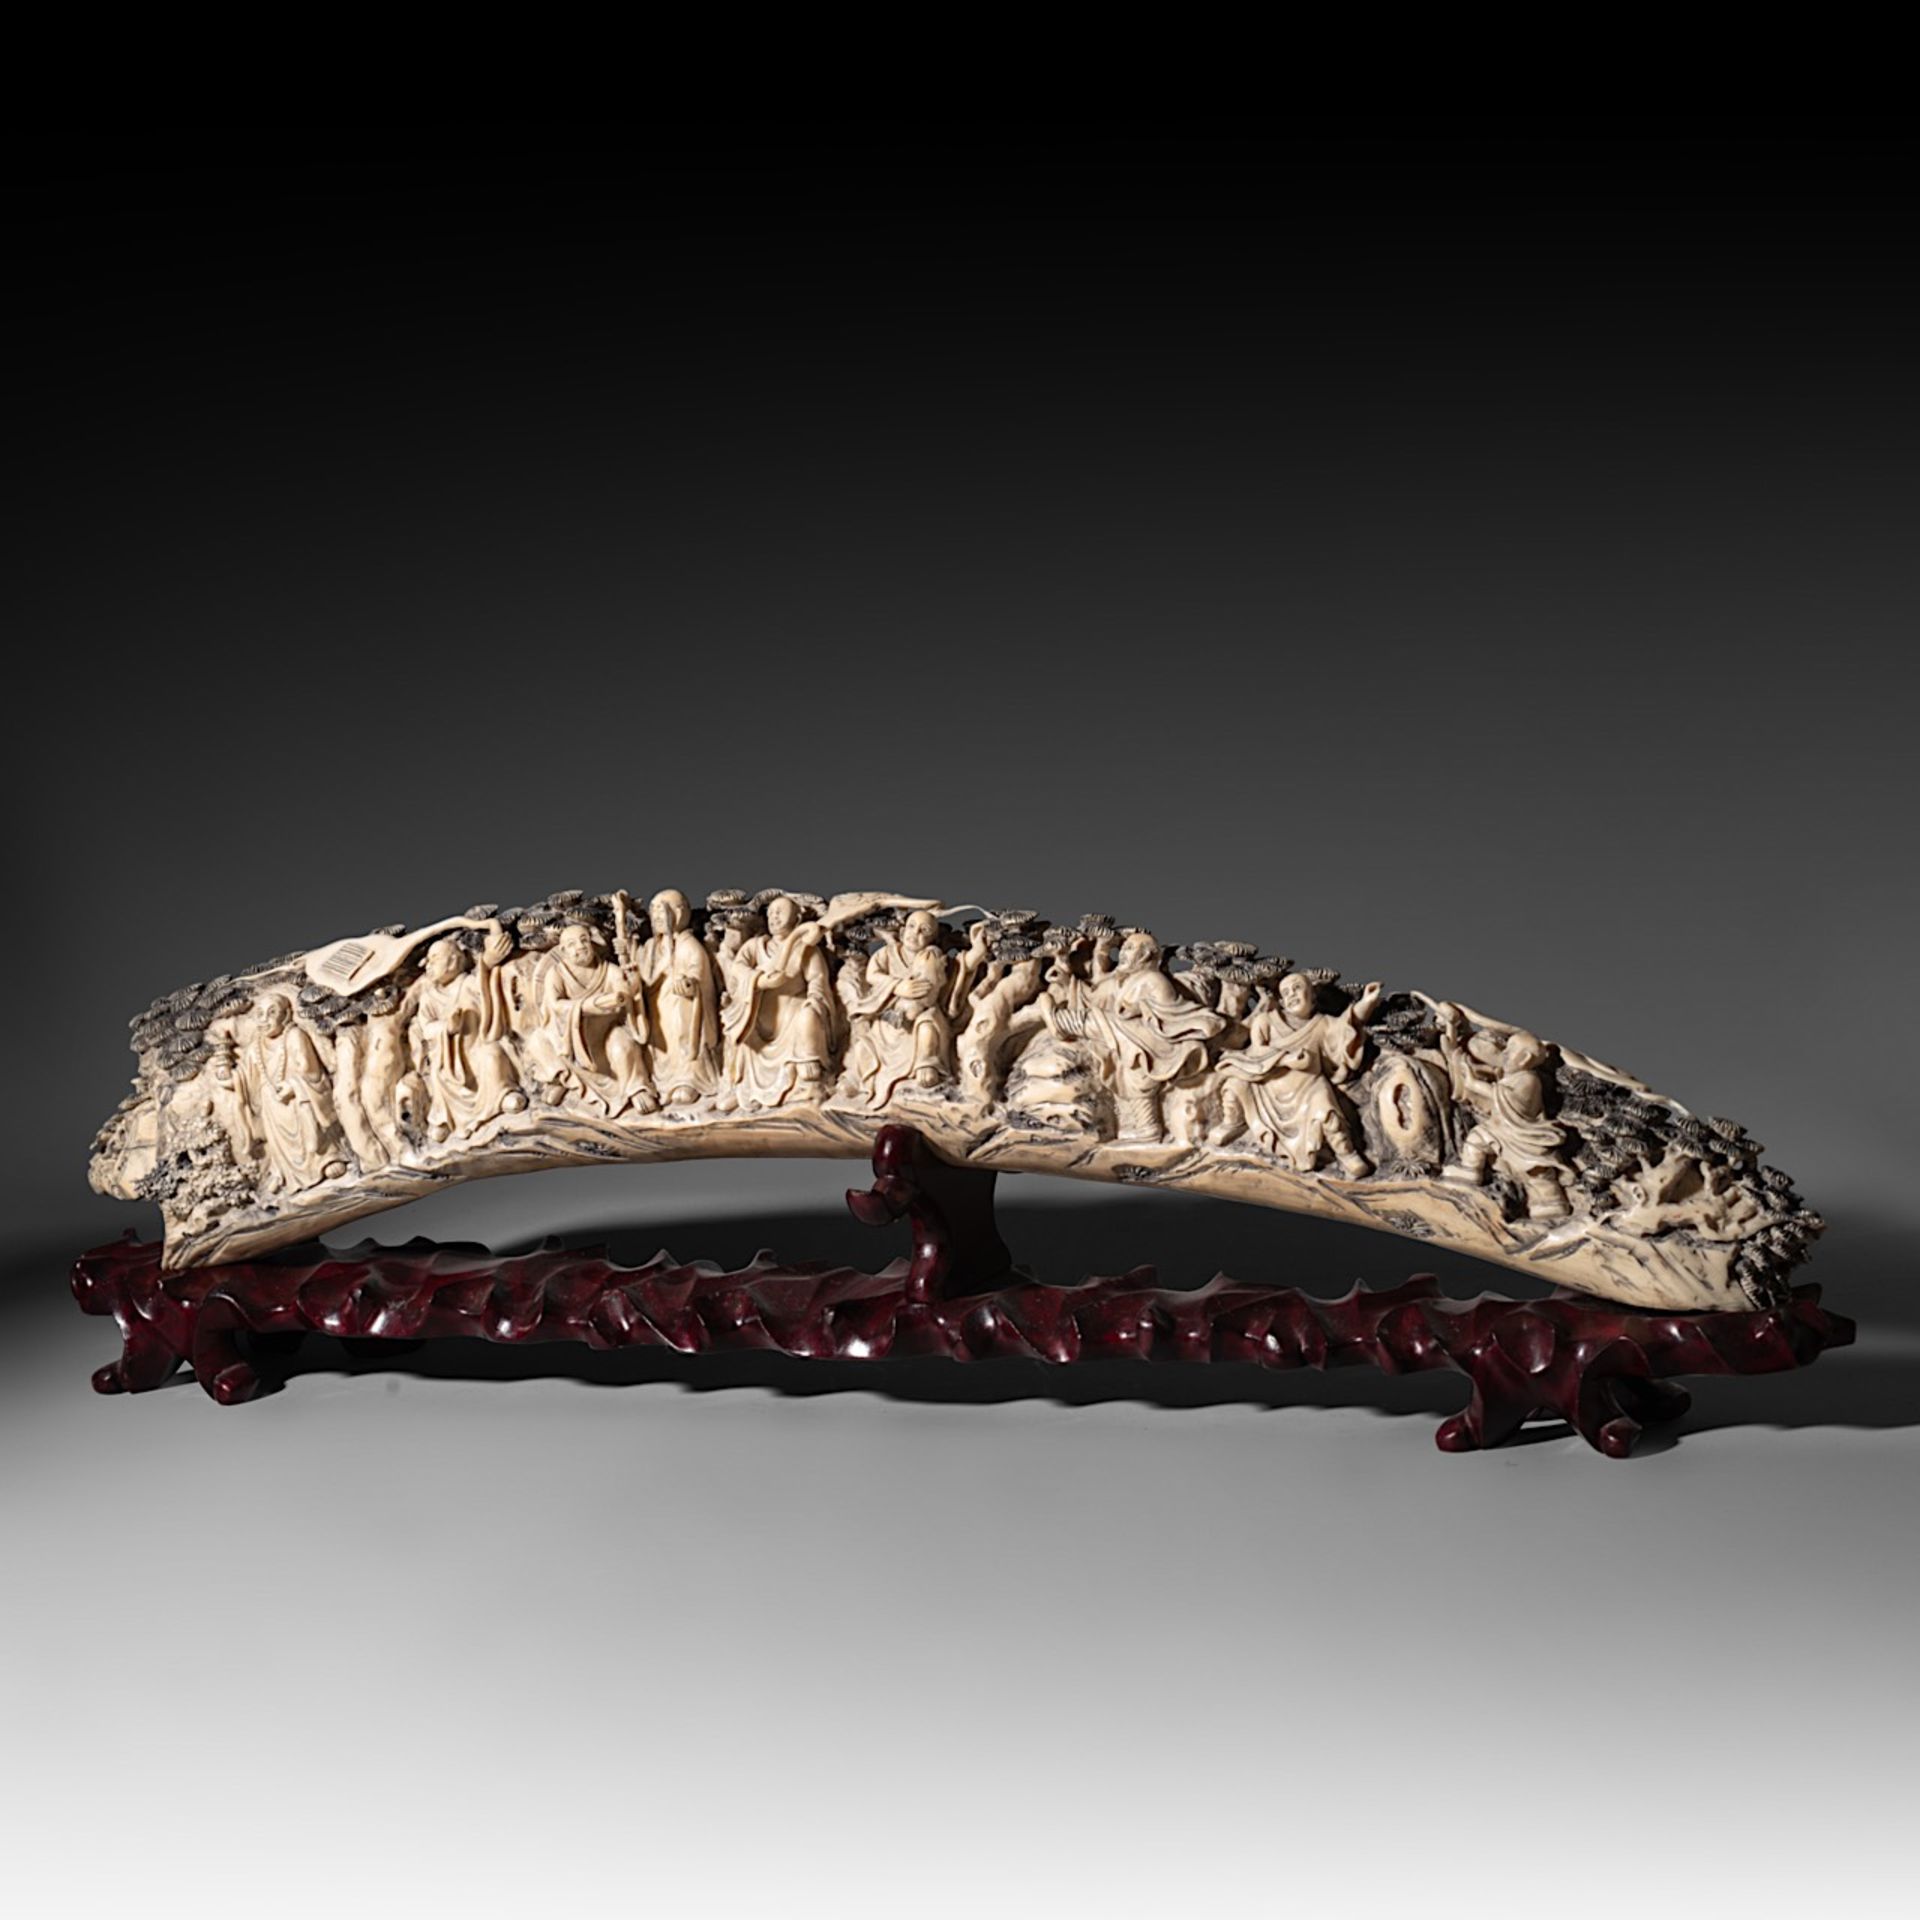 A Chinese late Qing/early Republic carved ivory tusk, on an exotic wooden base, W 85,6 cm - 5700g (+